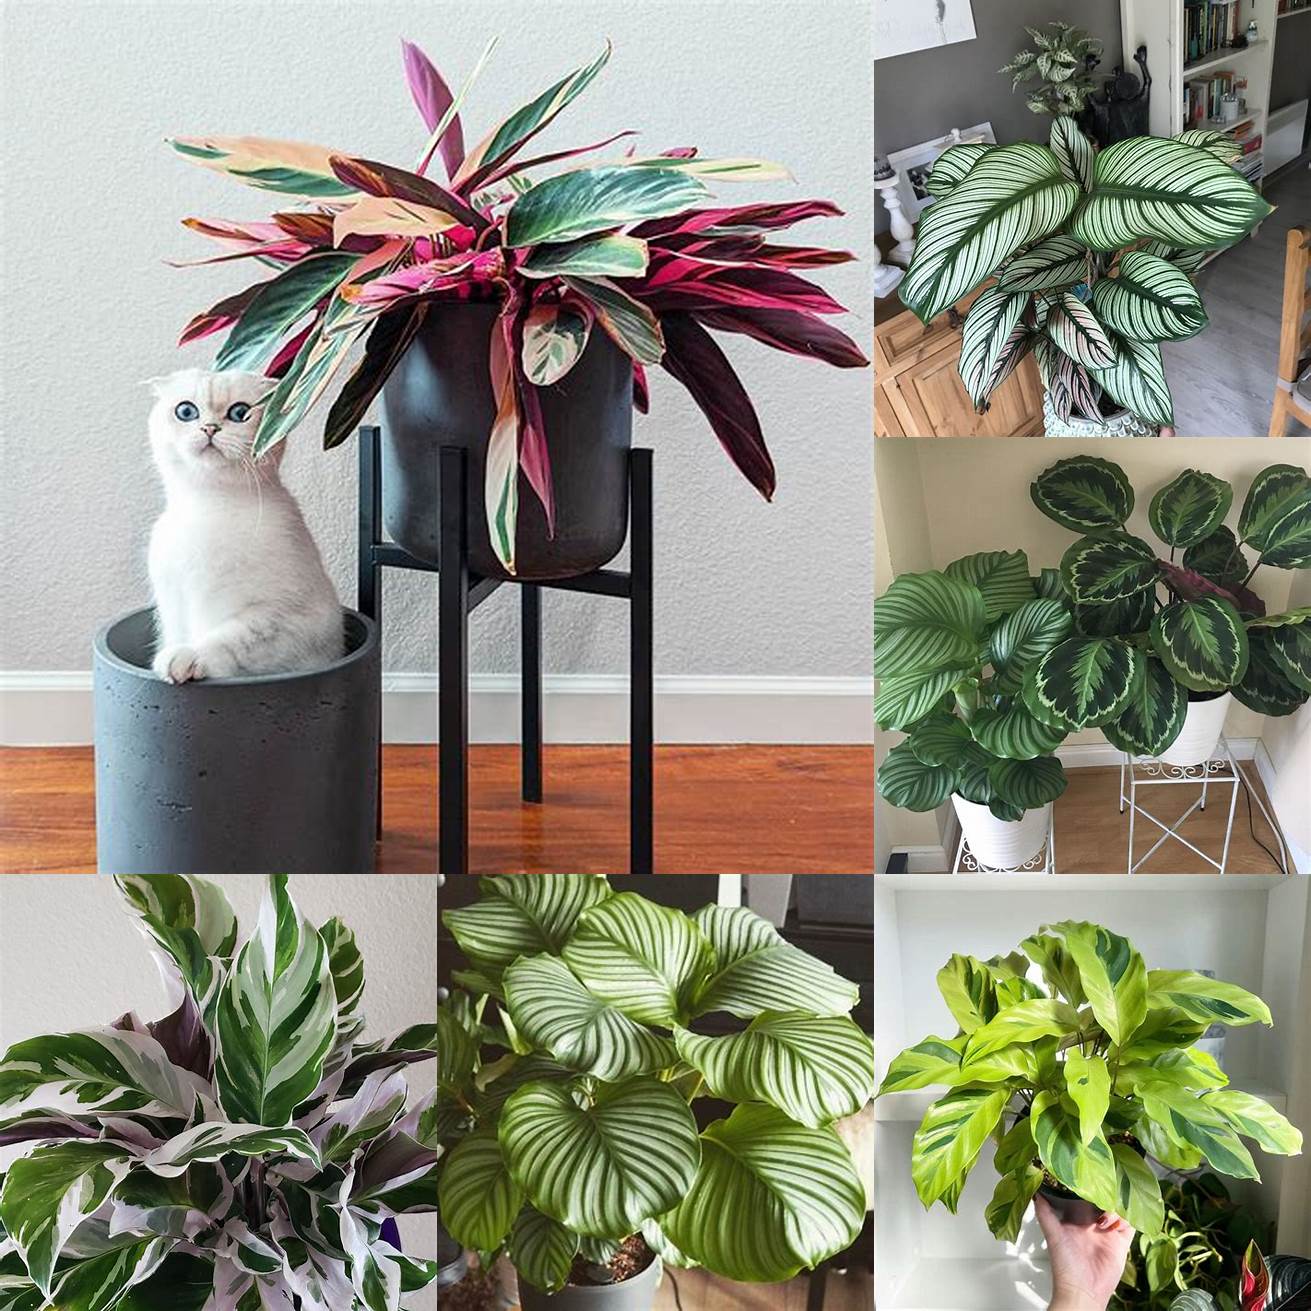 Q Can Calathea be grown in a home with cats A Its not recommended to grow Calathea in a home with cats due to the risk of poisoning